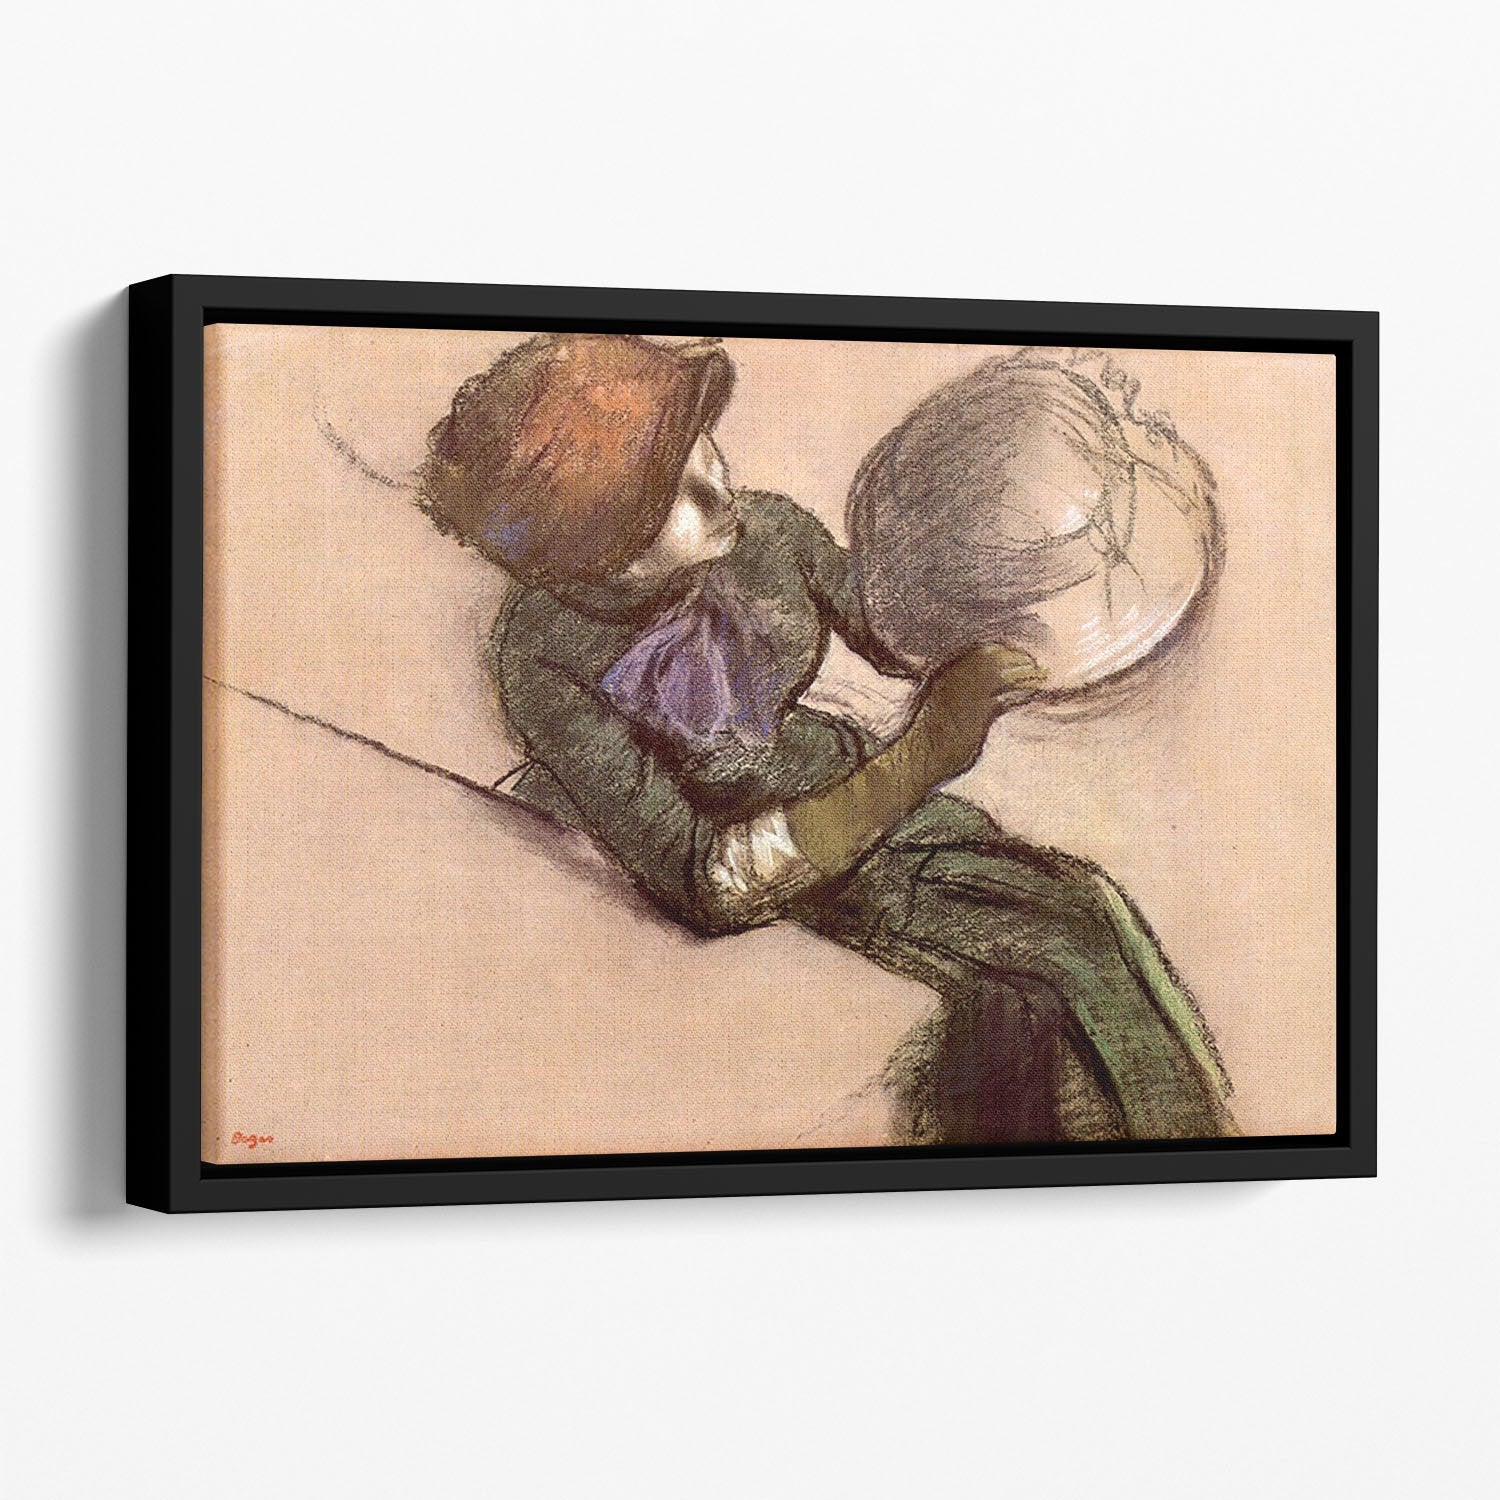 The milliner 2 by Degas Floating Framed Canvas